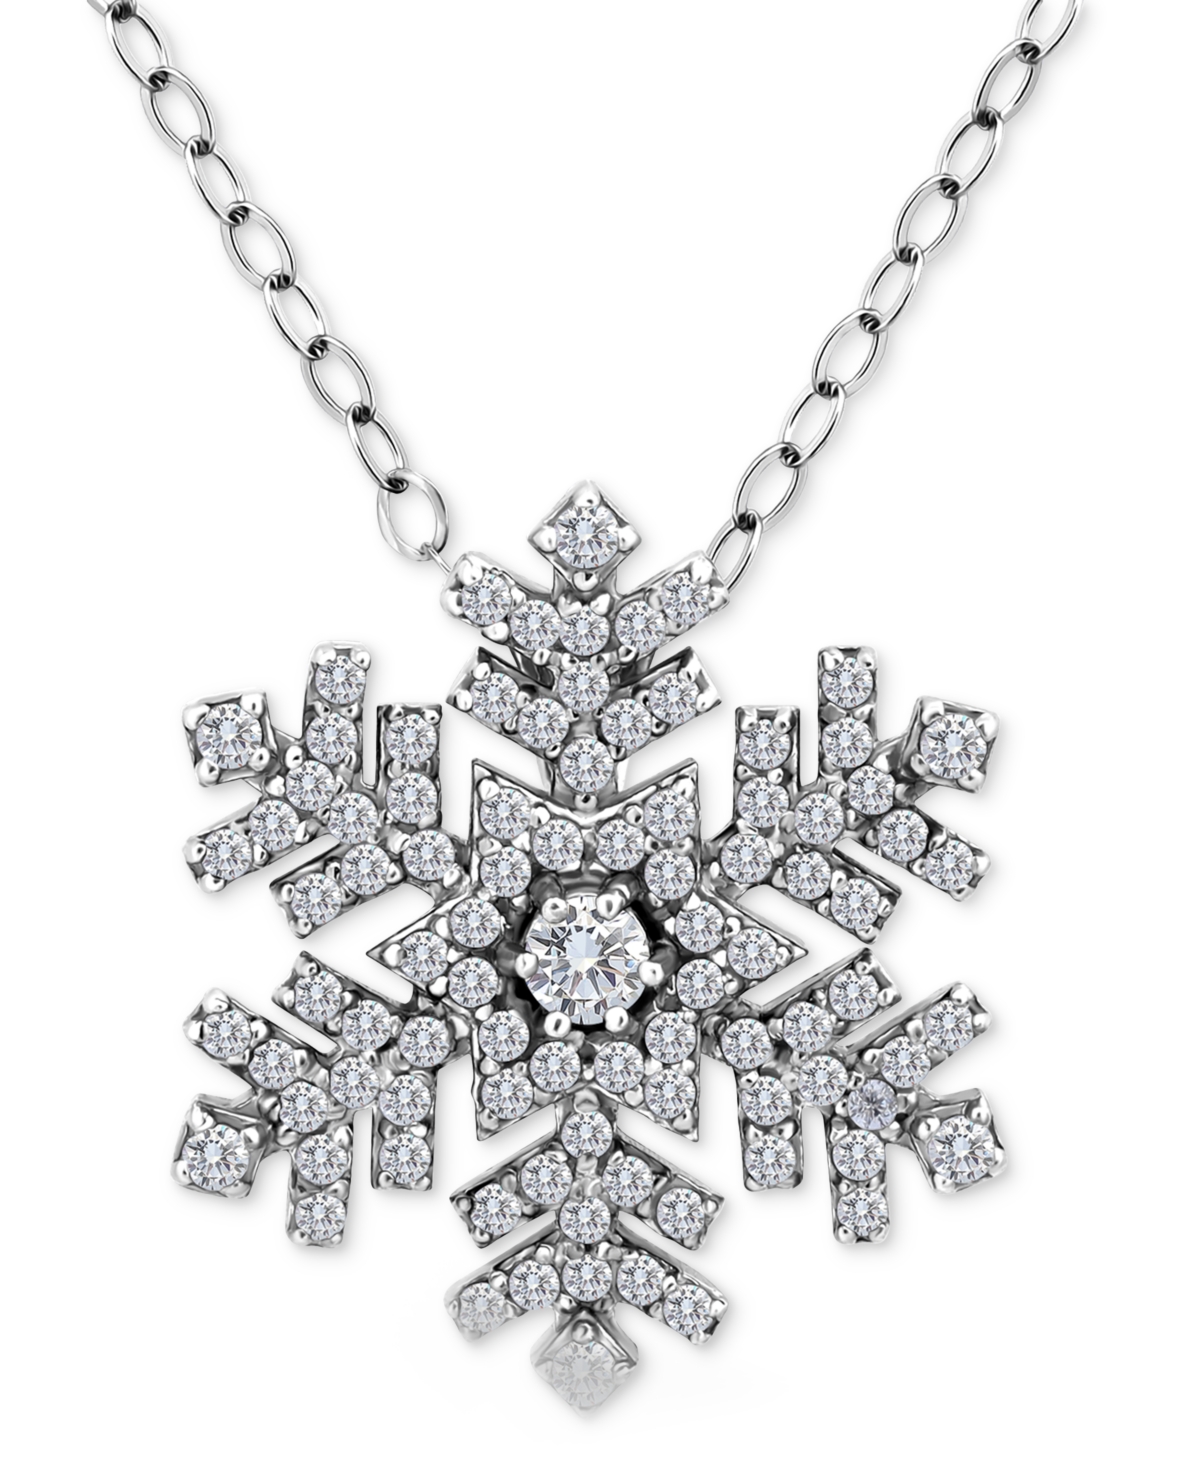 Cubic Zirconia Snowflake Pendant Necklace in Sterling Silver, 16" + 2" extender, Created for Macy's - Silver